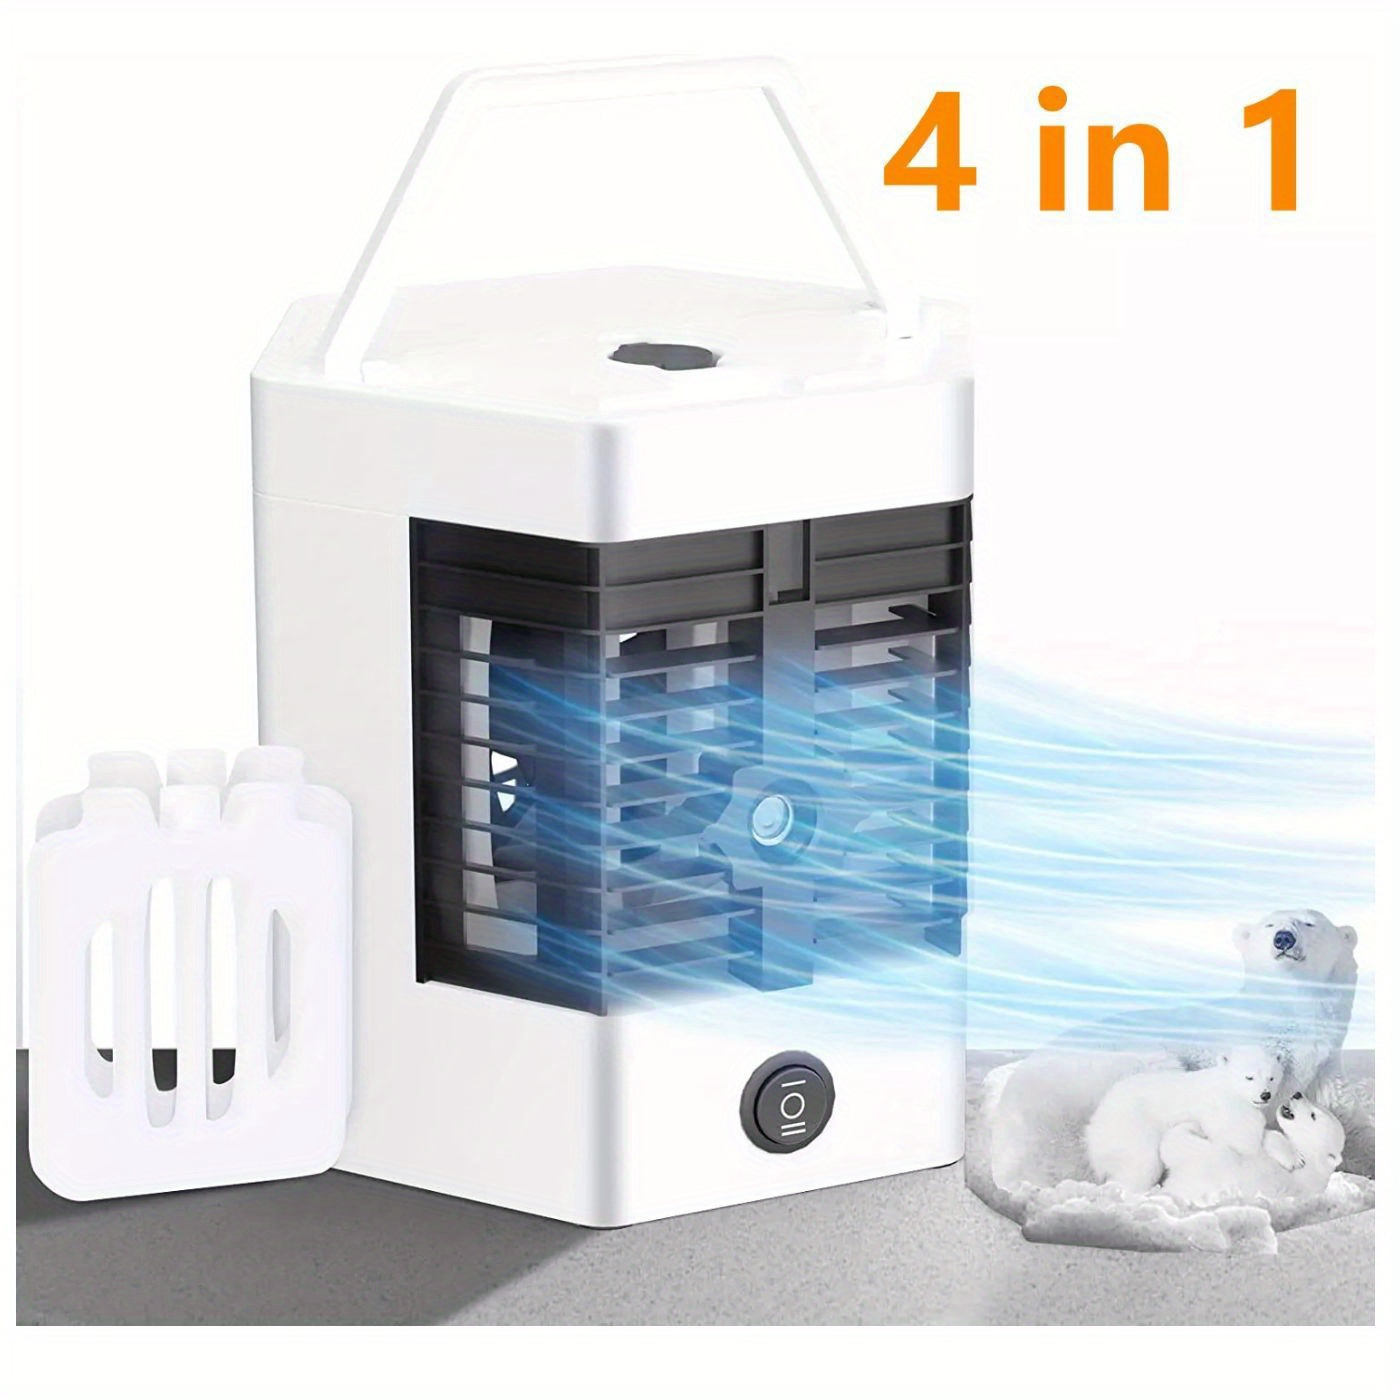 

Portable Air Conditioners, Mini Air Conditioner With 2 Water Tanks, Anti-leakage Water Personal Air Cooler For Room Office Camping